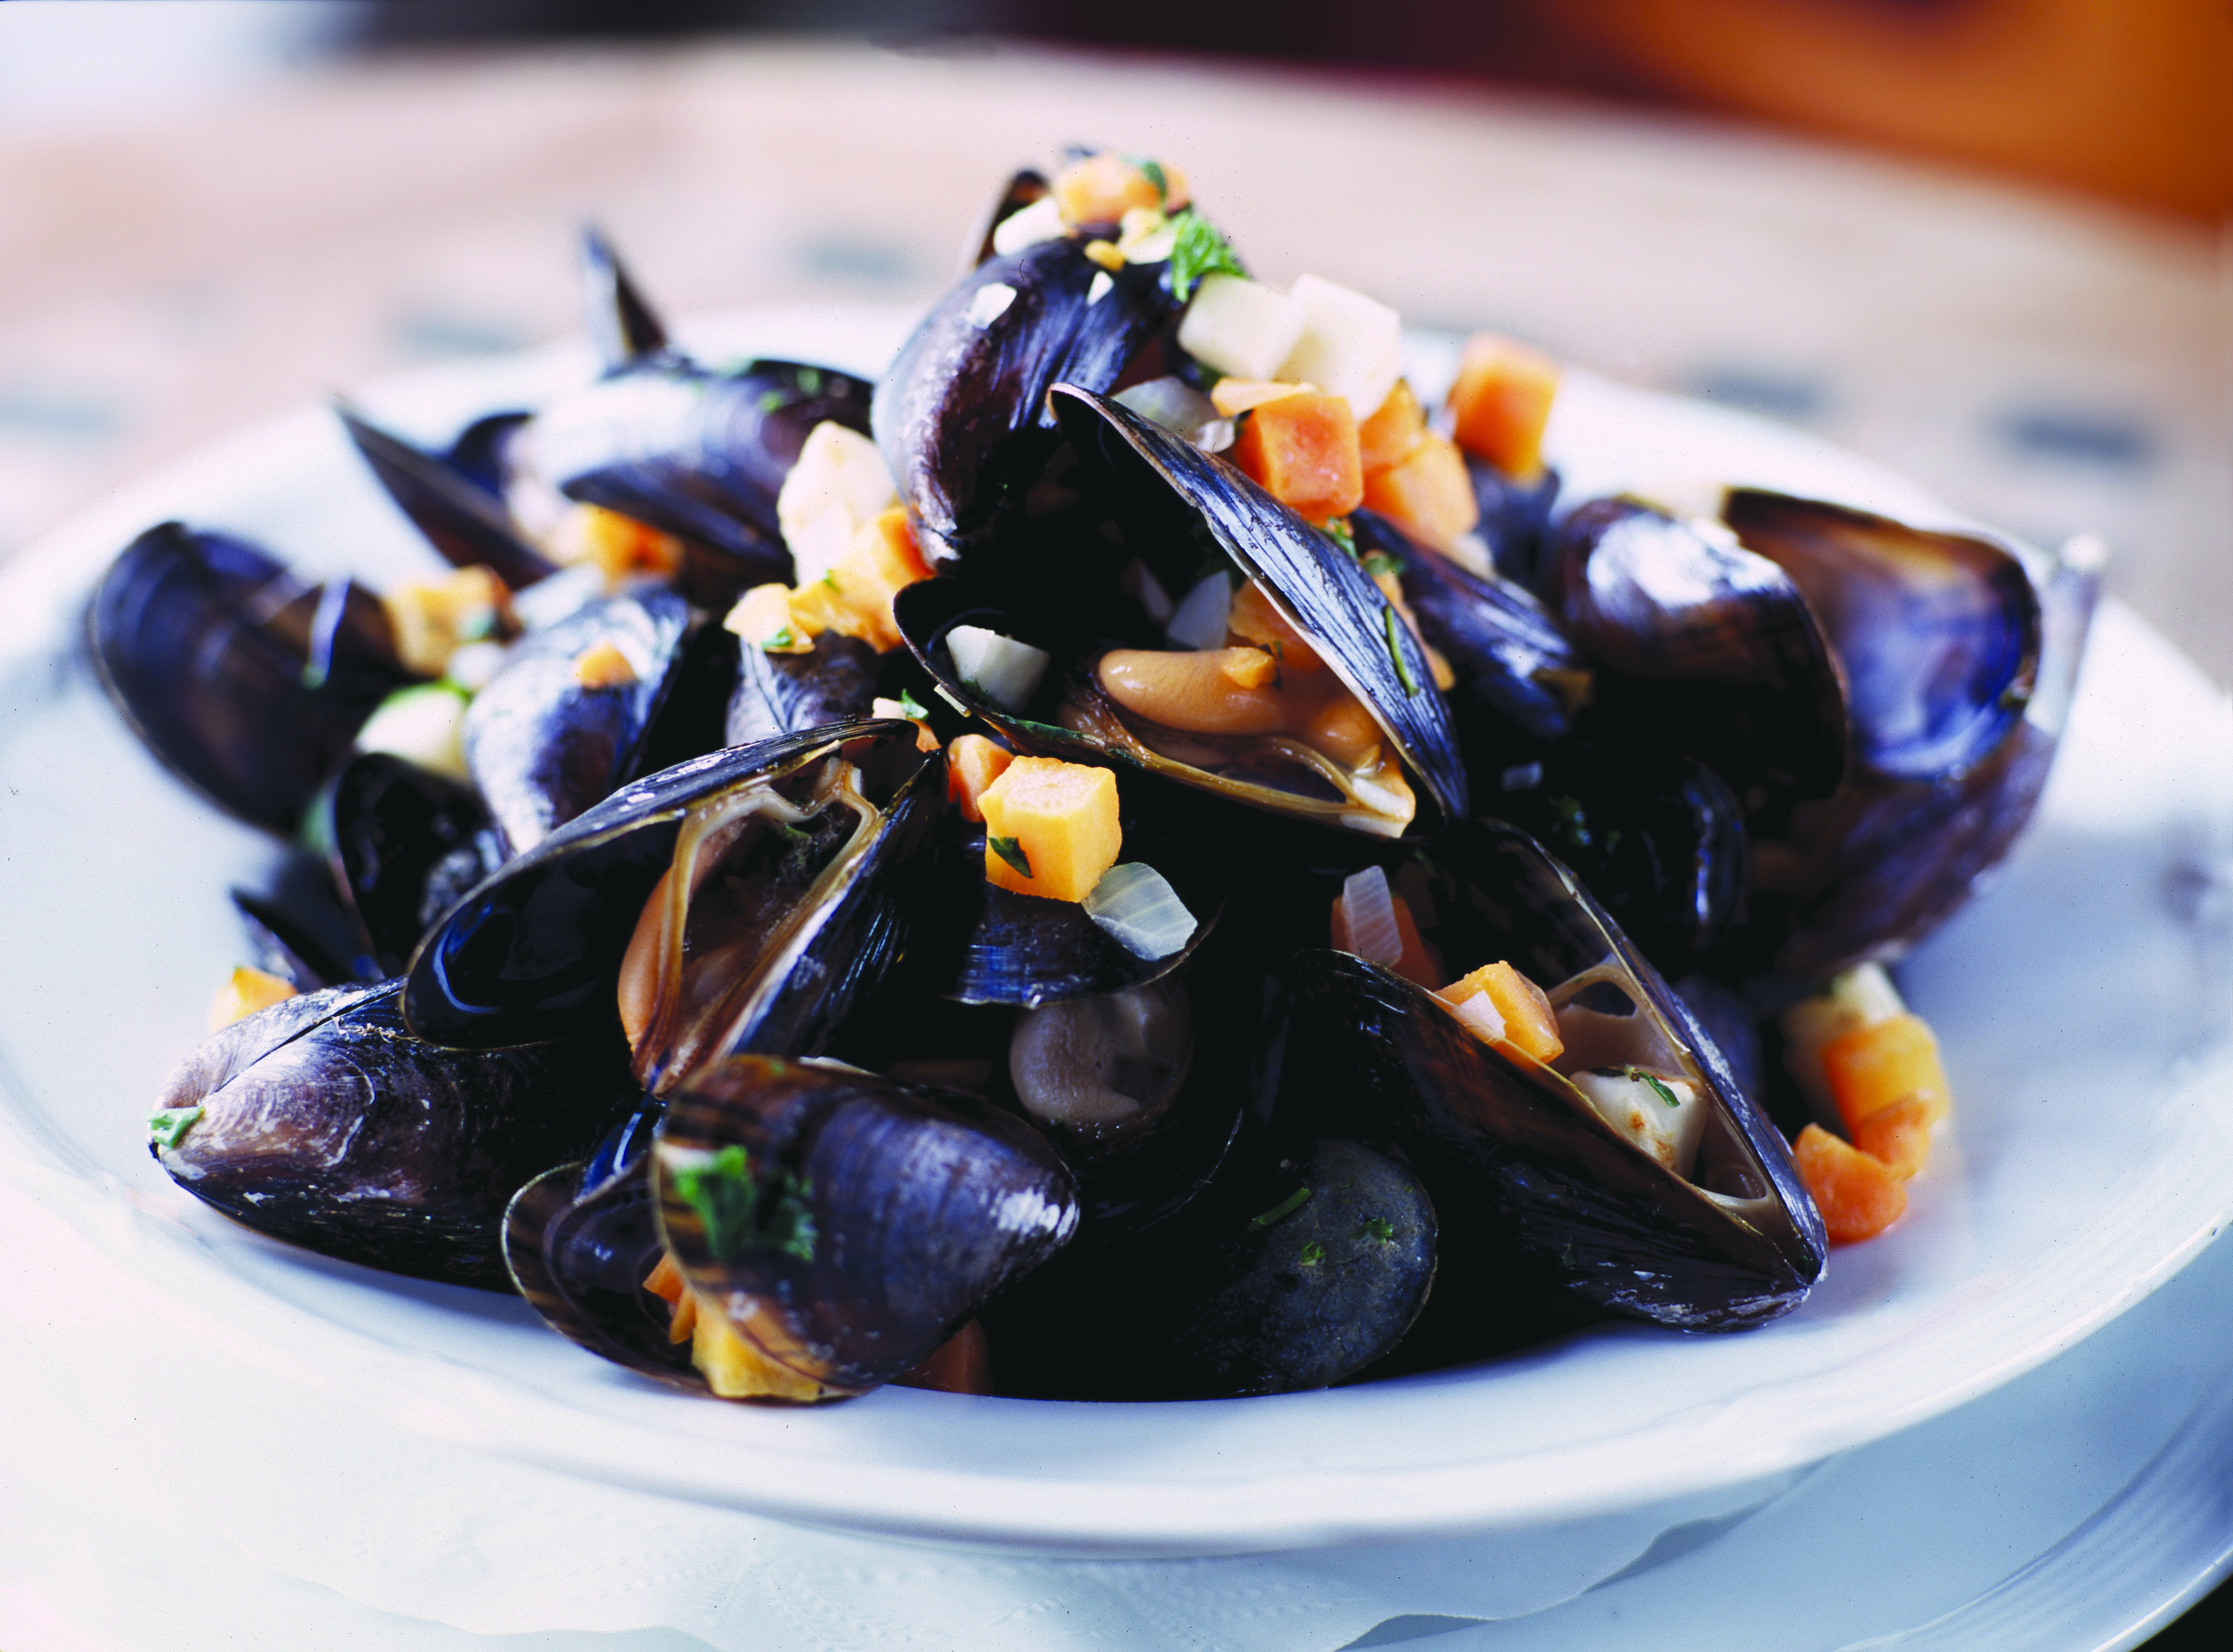 Mussels on tap